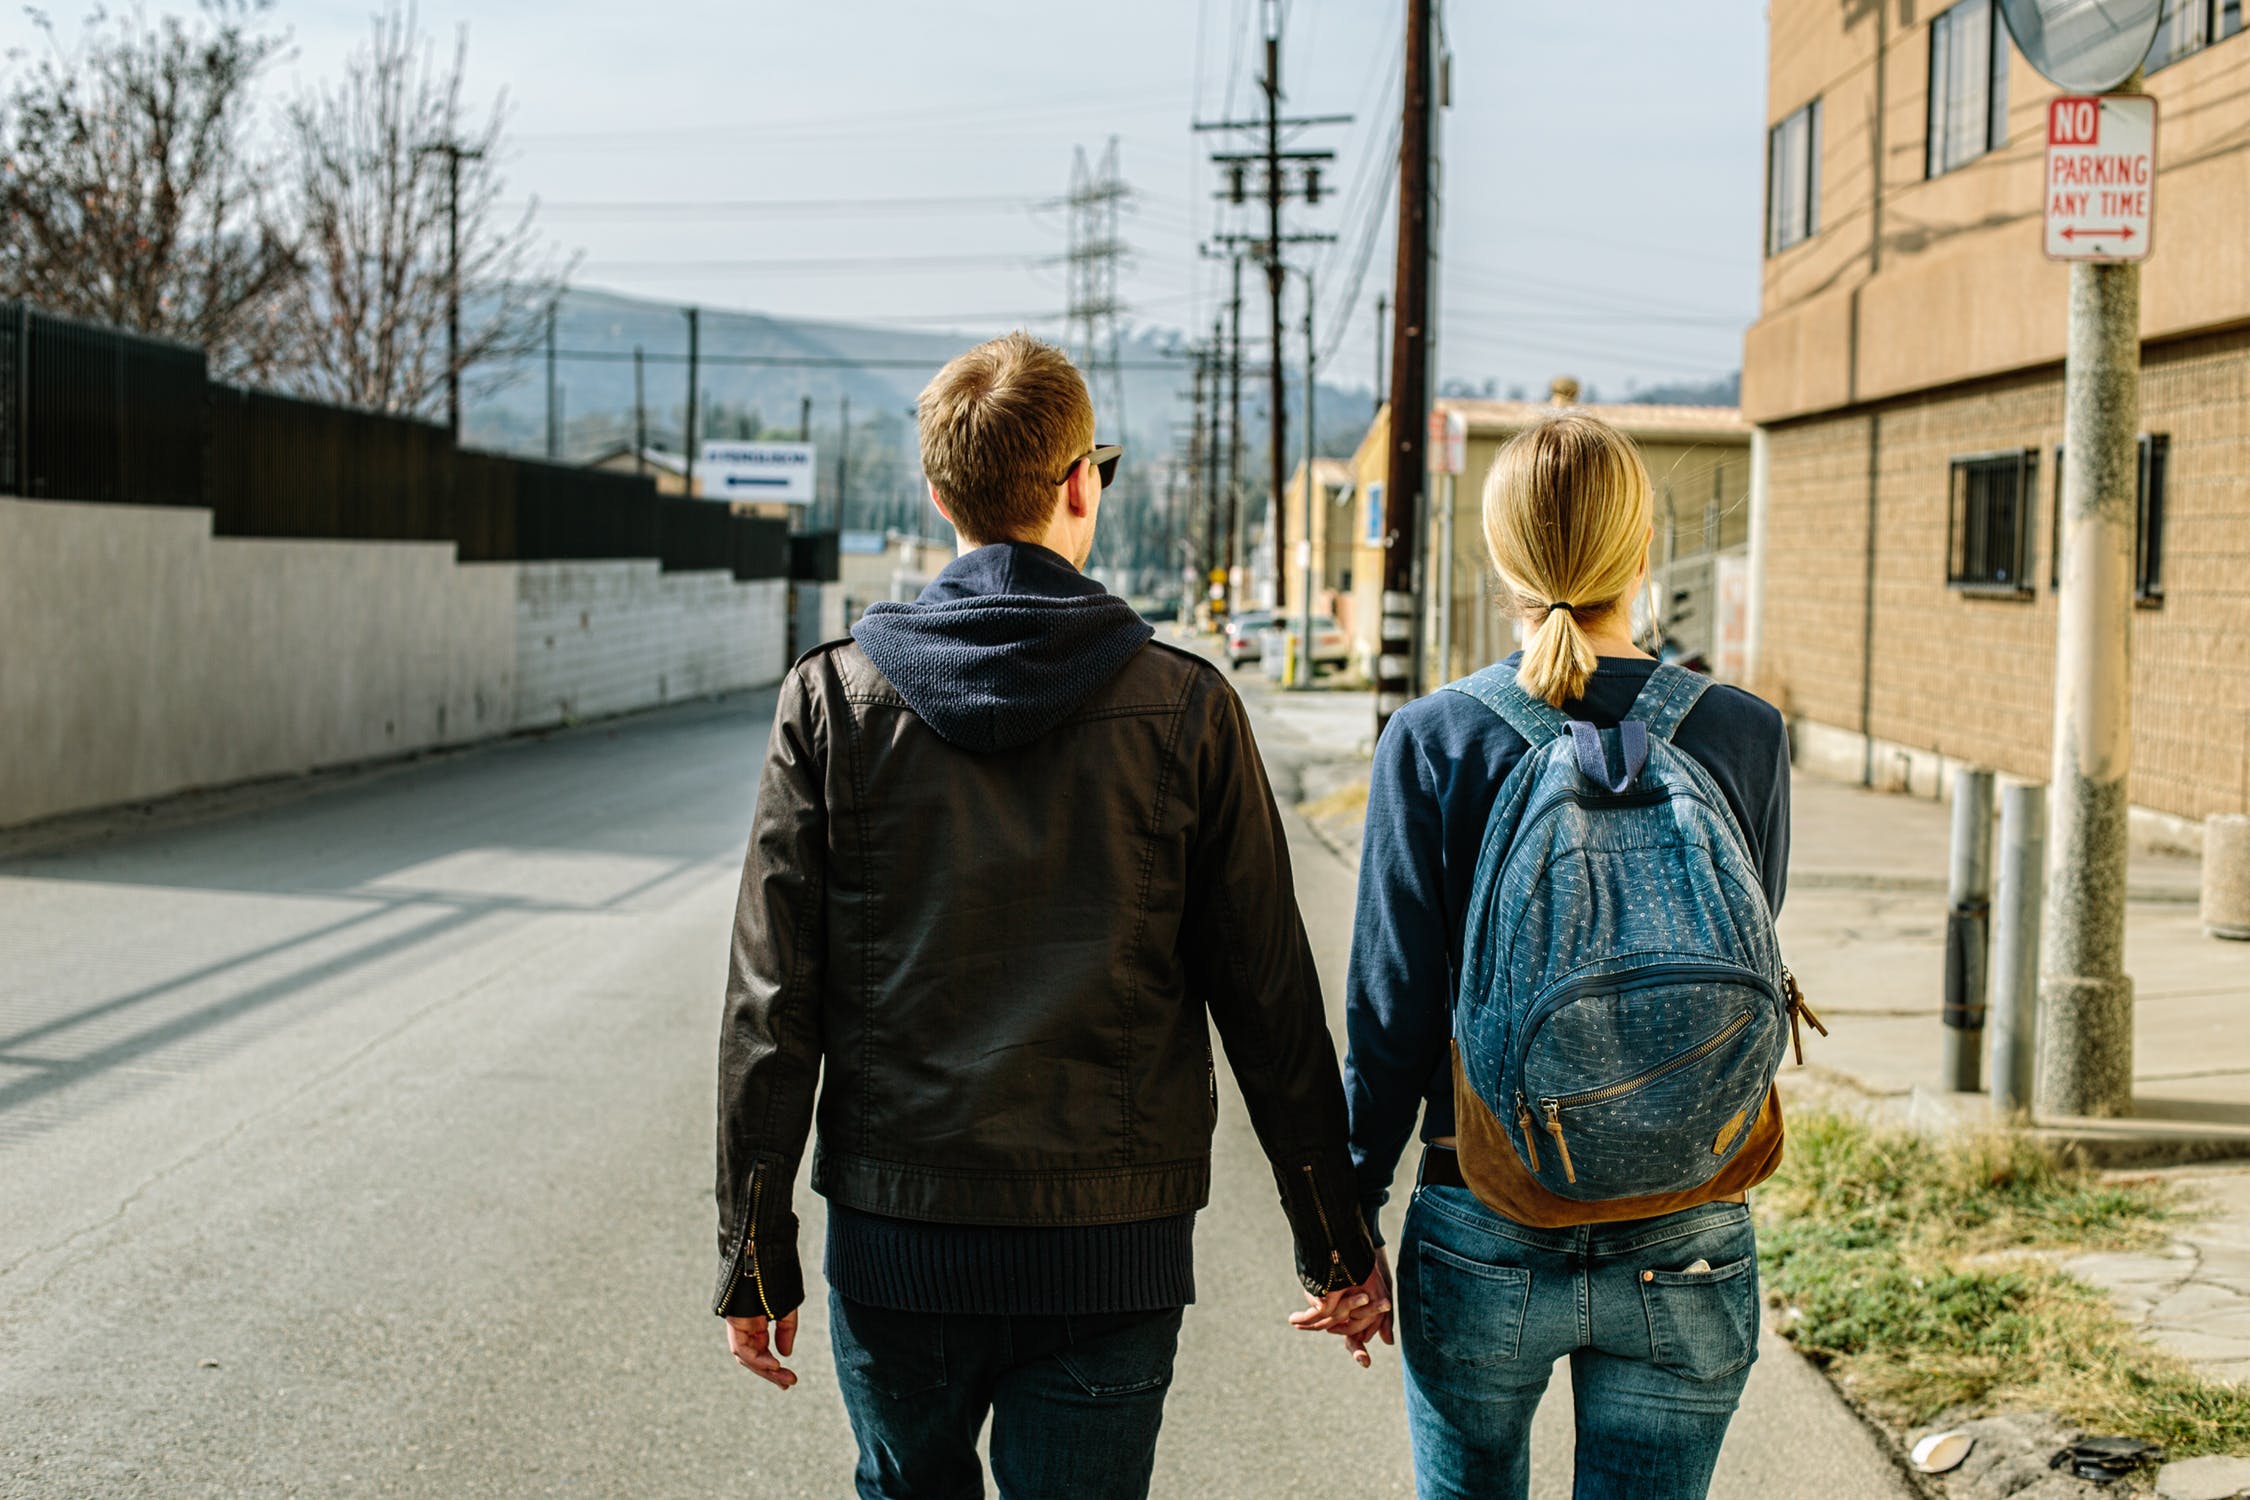 4 Benefits of Walking with Your Spouse